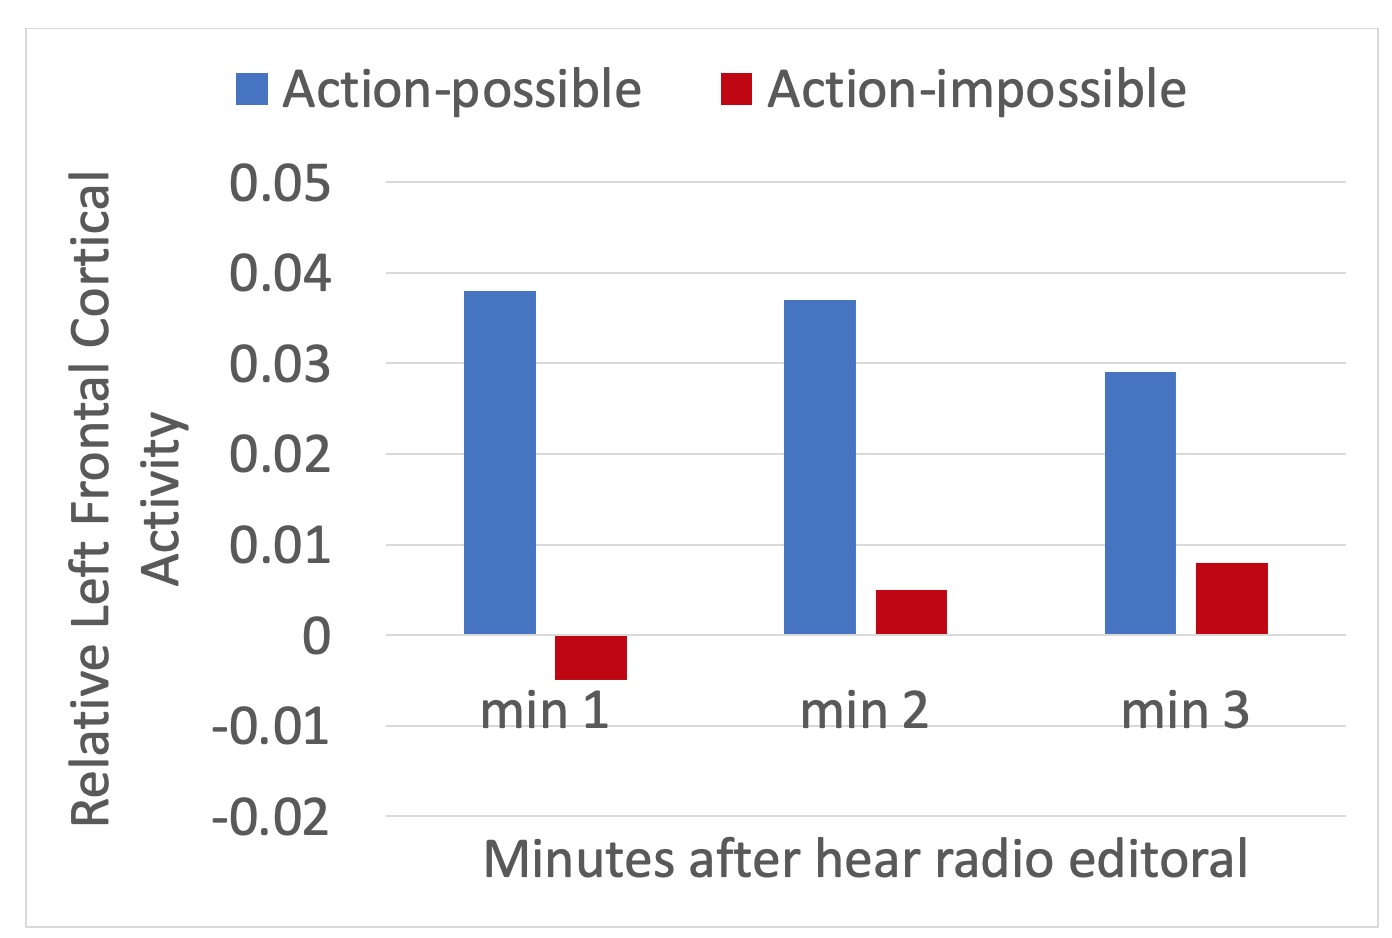 A bar graph. 3 sets of bar graphs are plotted, one for each minute after the radio editorial (minute 1, minute 2, minute 3). This is also the label of the x axis (minutes after hearing radio editorial). There is an action-possible (blue) bar, and a Action-impossible (red) bar in each of the 3 sets. the y axis is labeled - Relative Left Frontal Cortical Activity, and starts at -0.02, increases in increments of .01, to a maximum of 0.05. Min 1, action-possible bar, 0.038. min 1, action-impossible bar, -0.005. Min 2, action-possible bar, 0.037. Min 2, action-impossible bar, .004. Min 3, action-possible bar, 0.029. Min 3, action-impossible bar, 0.008